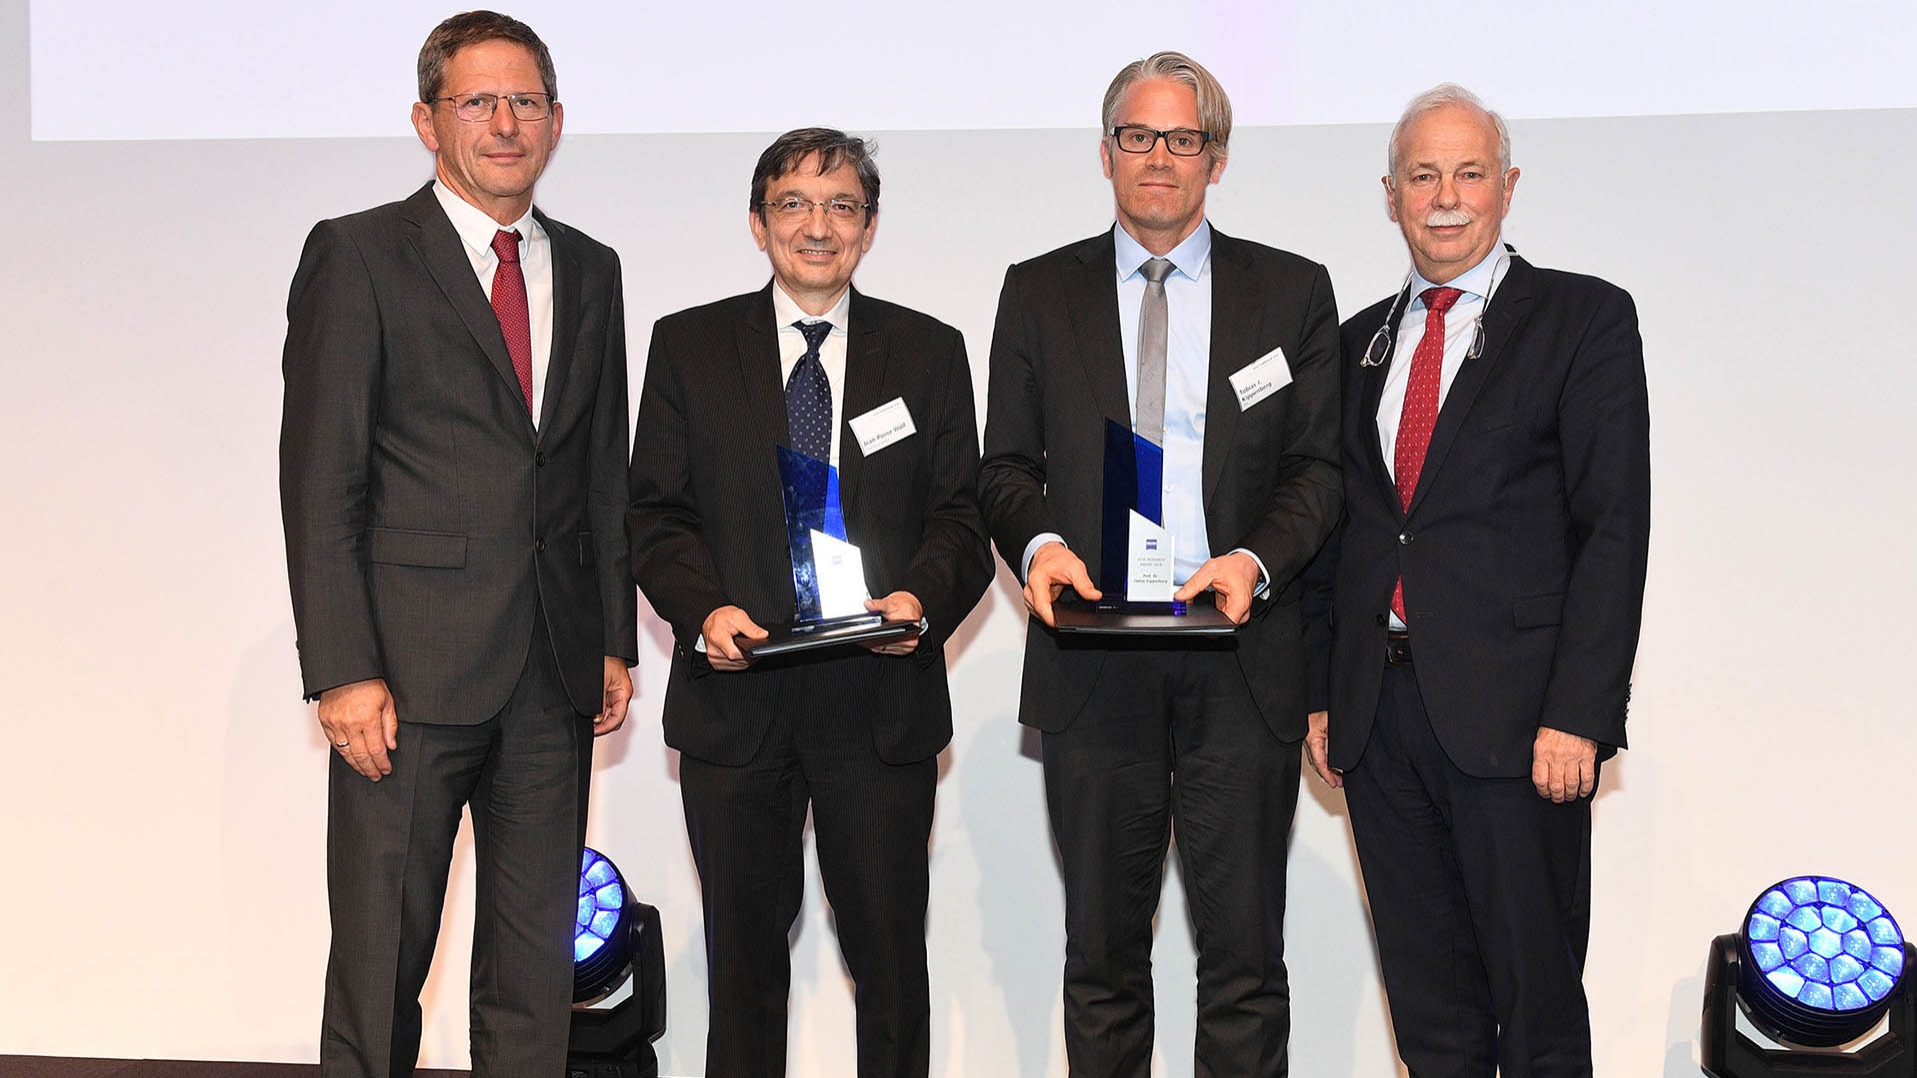 ZEISS Research Award Ceremony: Dr. Jean Pierre Wolf (Institute for Biophotonics at the University of Geneva) and Dr. Tobias Kippenberg (Laboratory of Photonics and Quantum Measurements at École Polytechnique Fédérale de Lausanne – EPFL; 2nd and 3rd from left). Dr. Michael Kaschke, President and CEO of ZEISS (left), and speaker Dr. Jürgen Mlynek, Professor at the Humboldt University of Berlin and former President of the Helmholtz Association, honored the awardwinners.